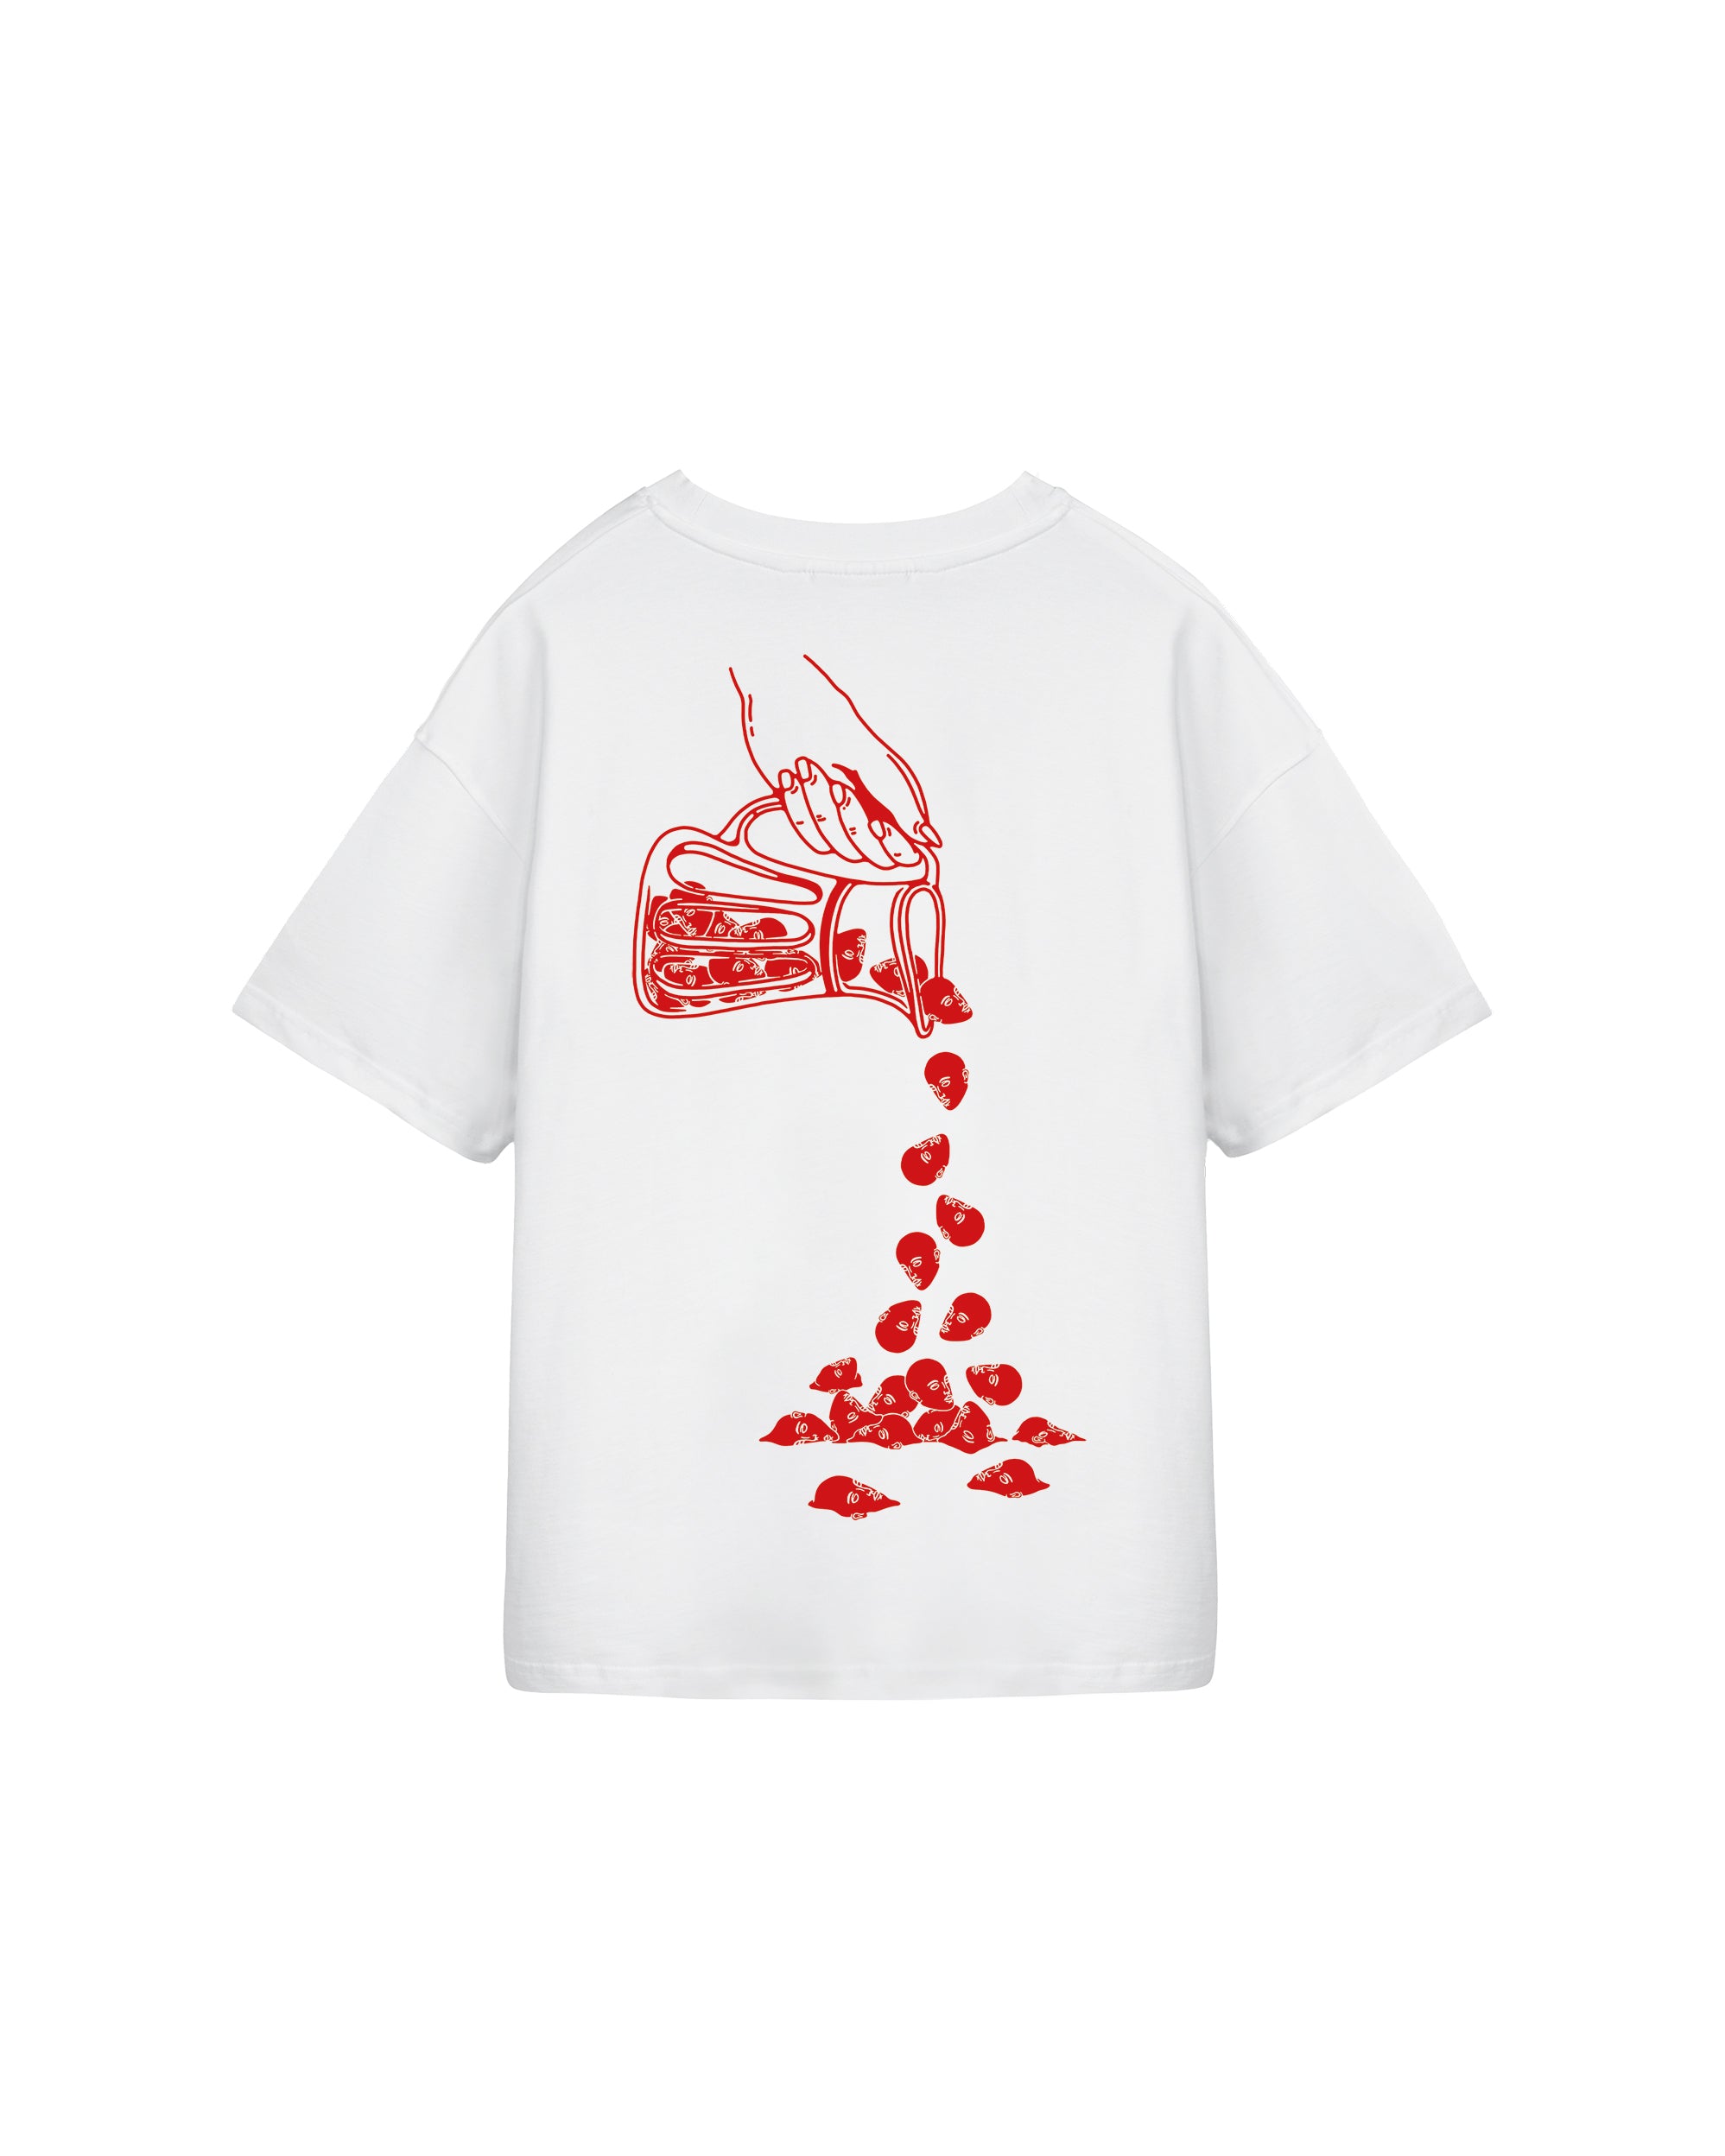 Syrup Visions Basic Tee White (Red)